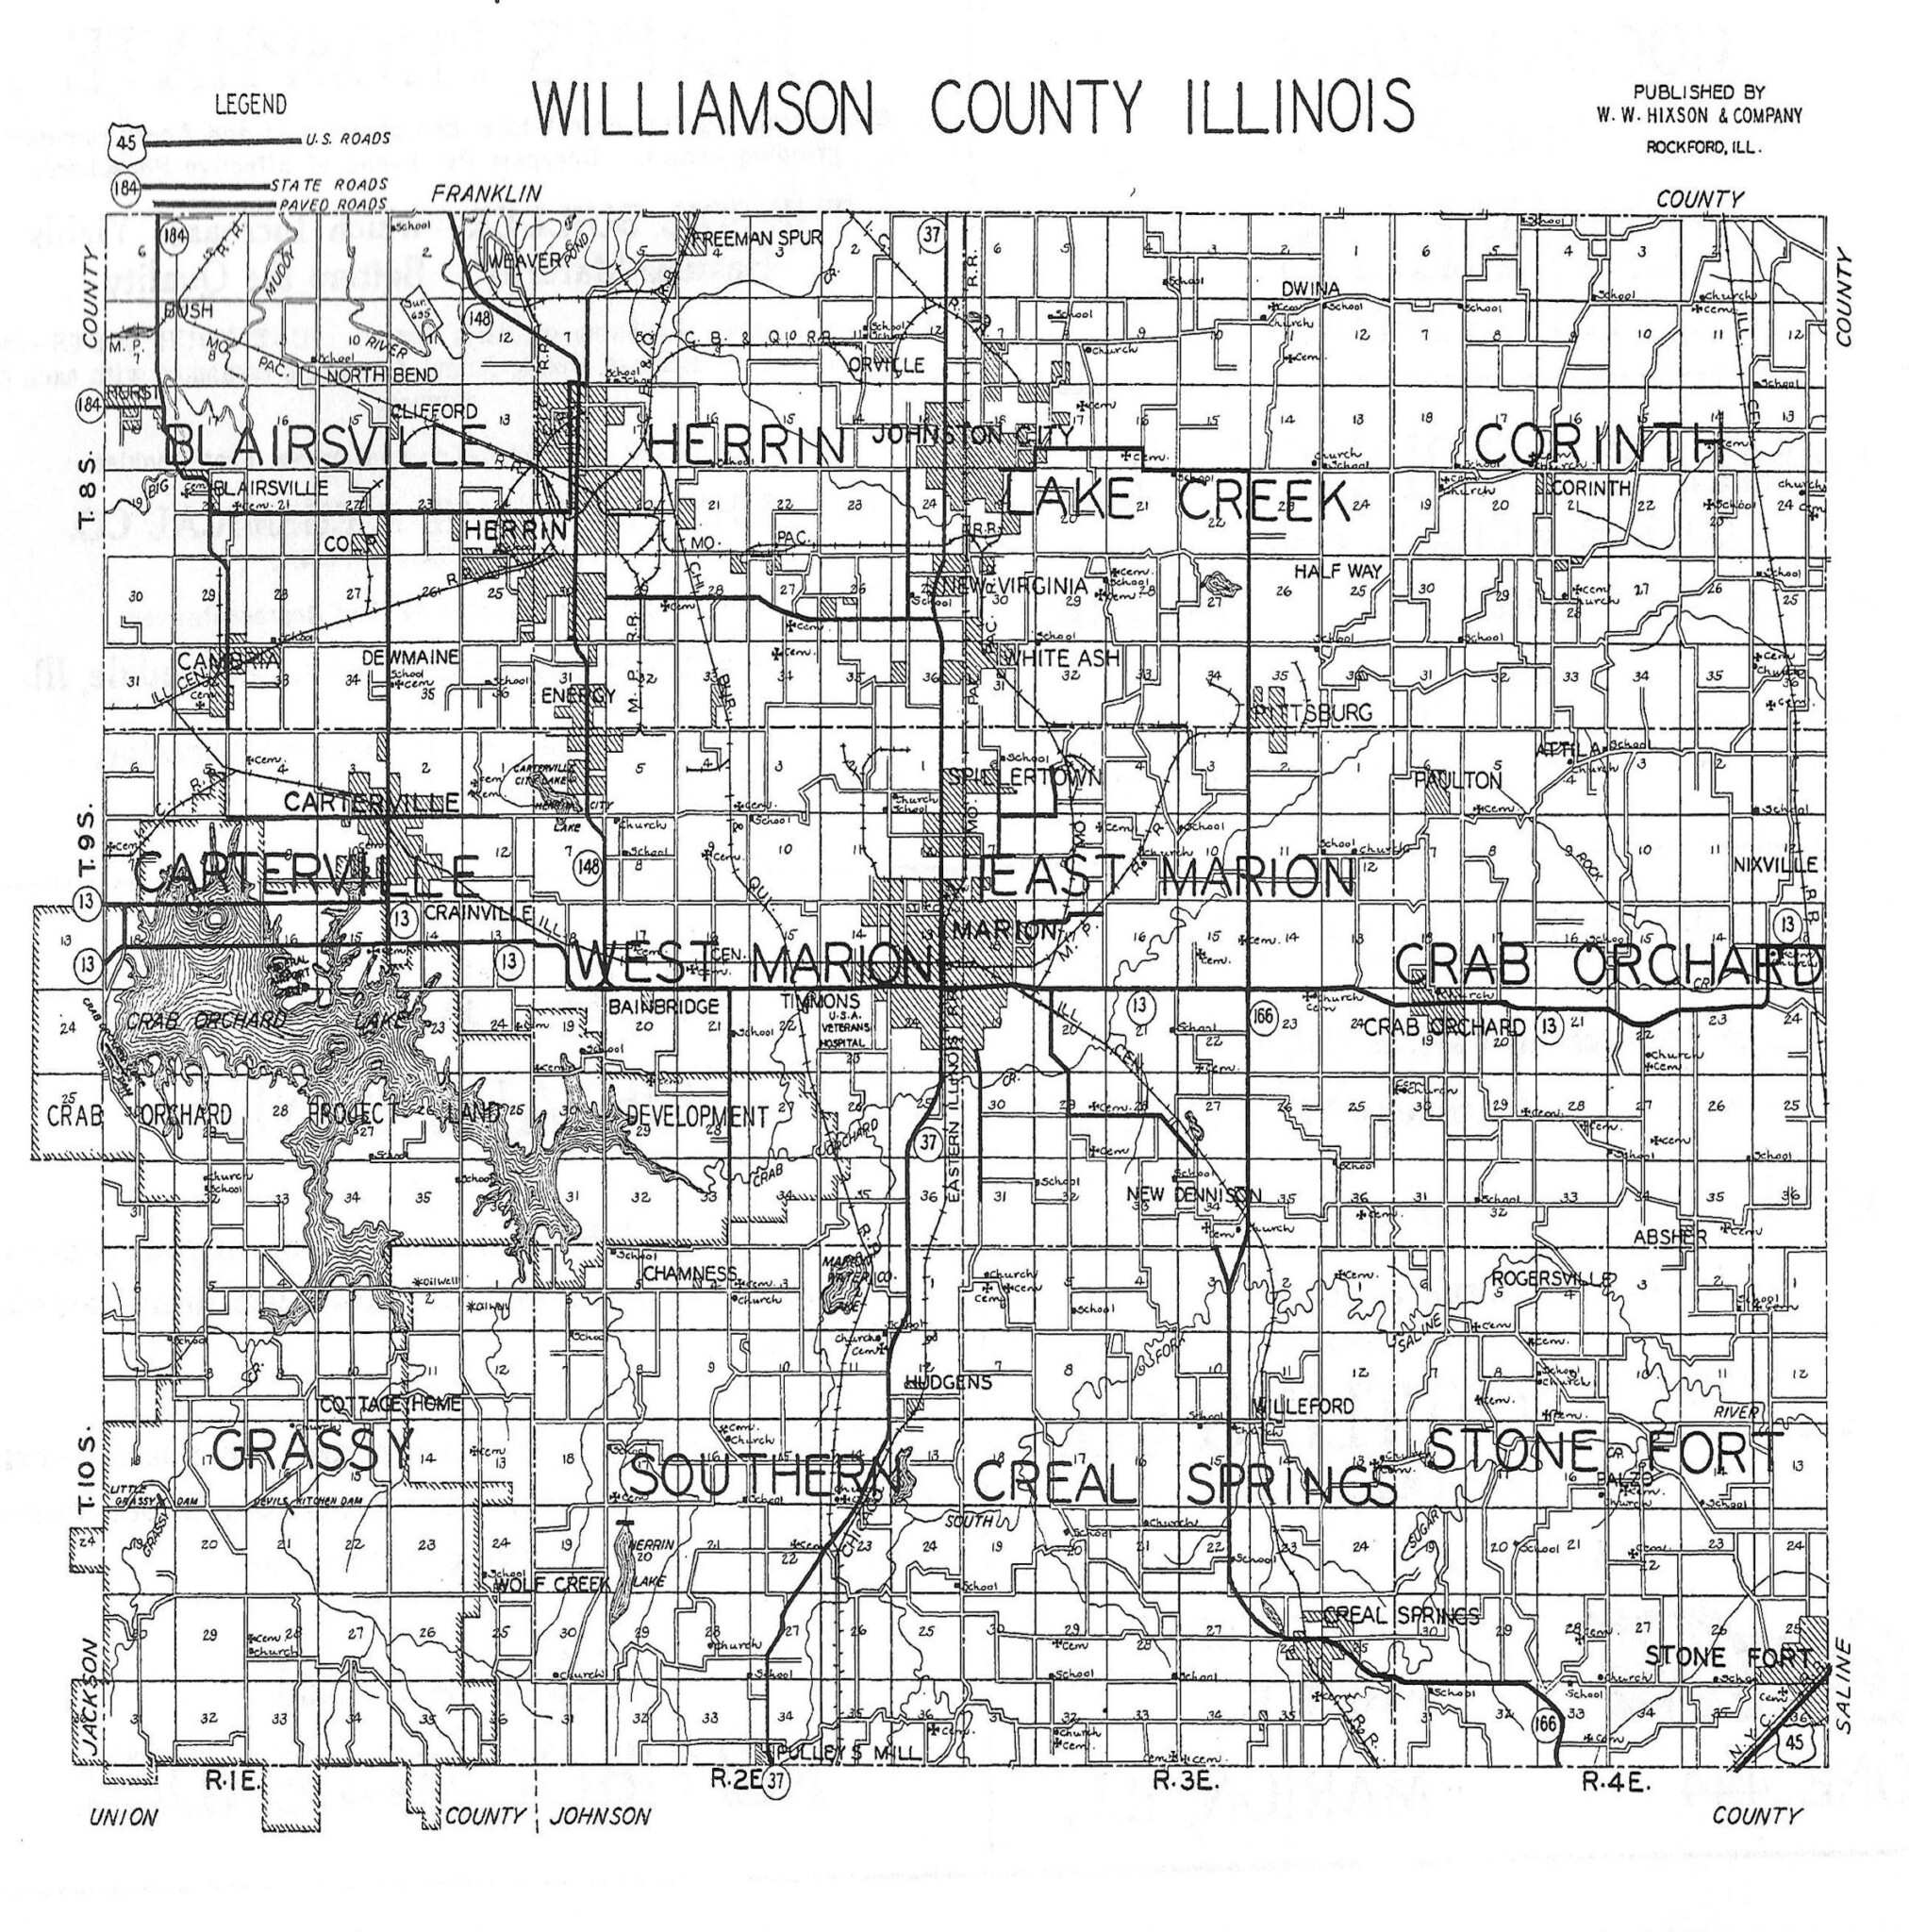 1940 Williamson County Plat Maps Marion Illinois History Preservation 0124